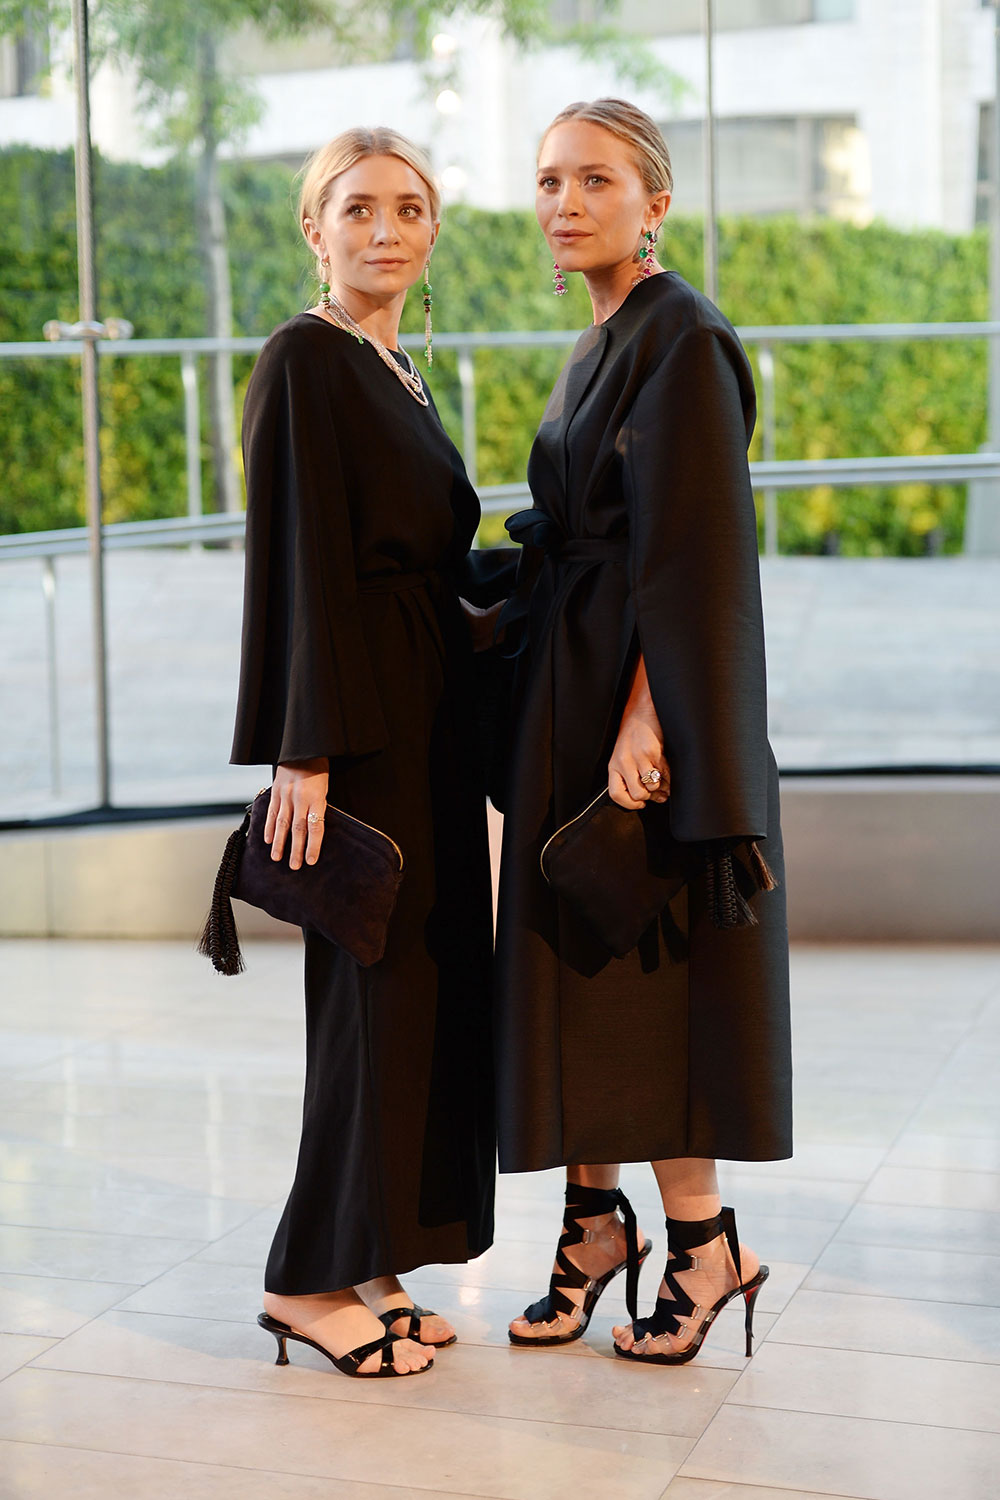 Mary-Kate and Ashley Olsen at the CFDA Fashion Awards in 2014